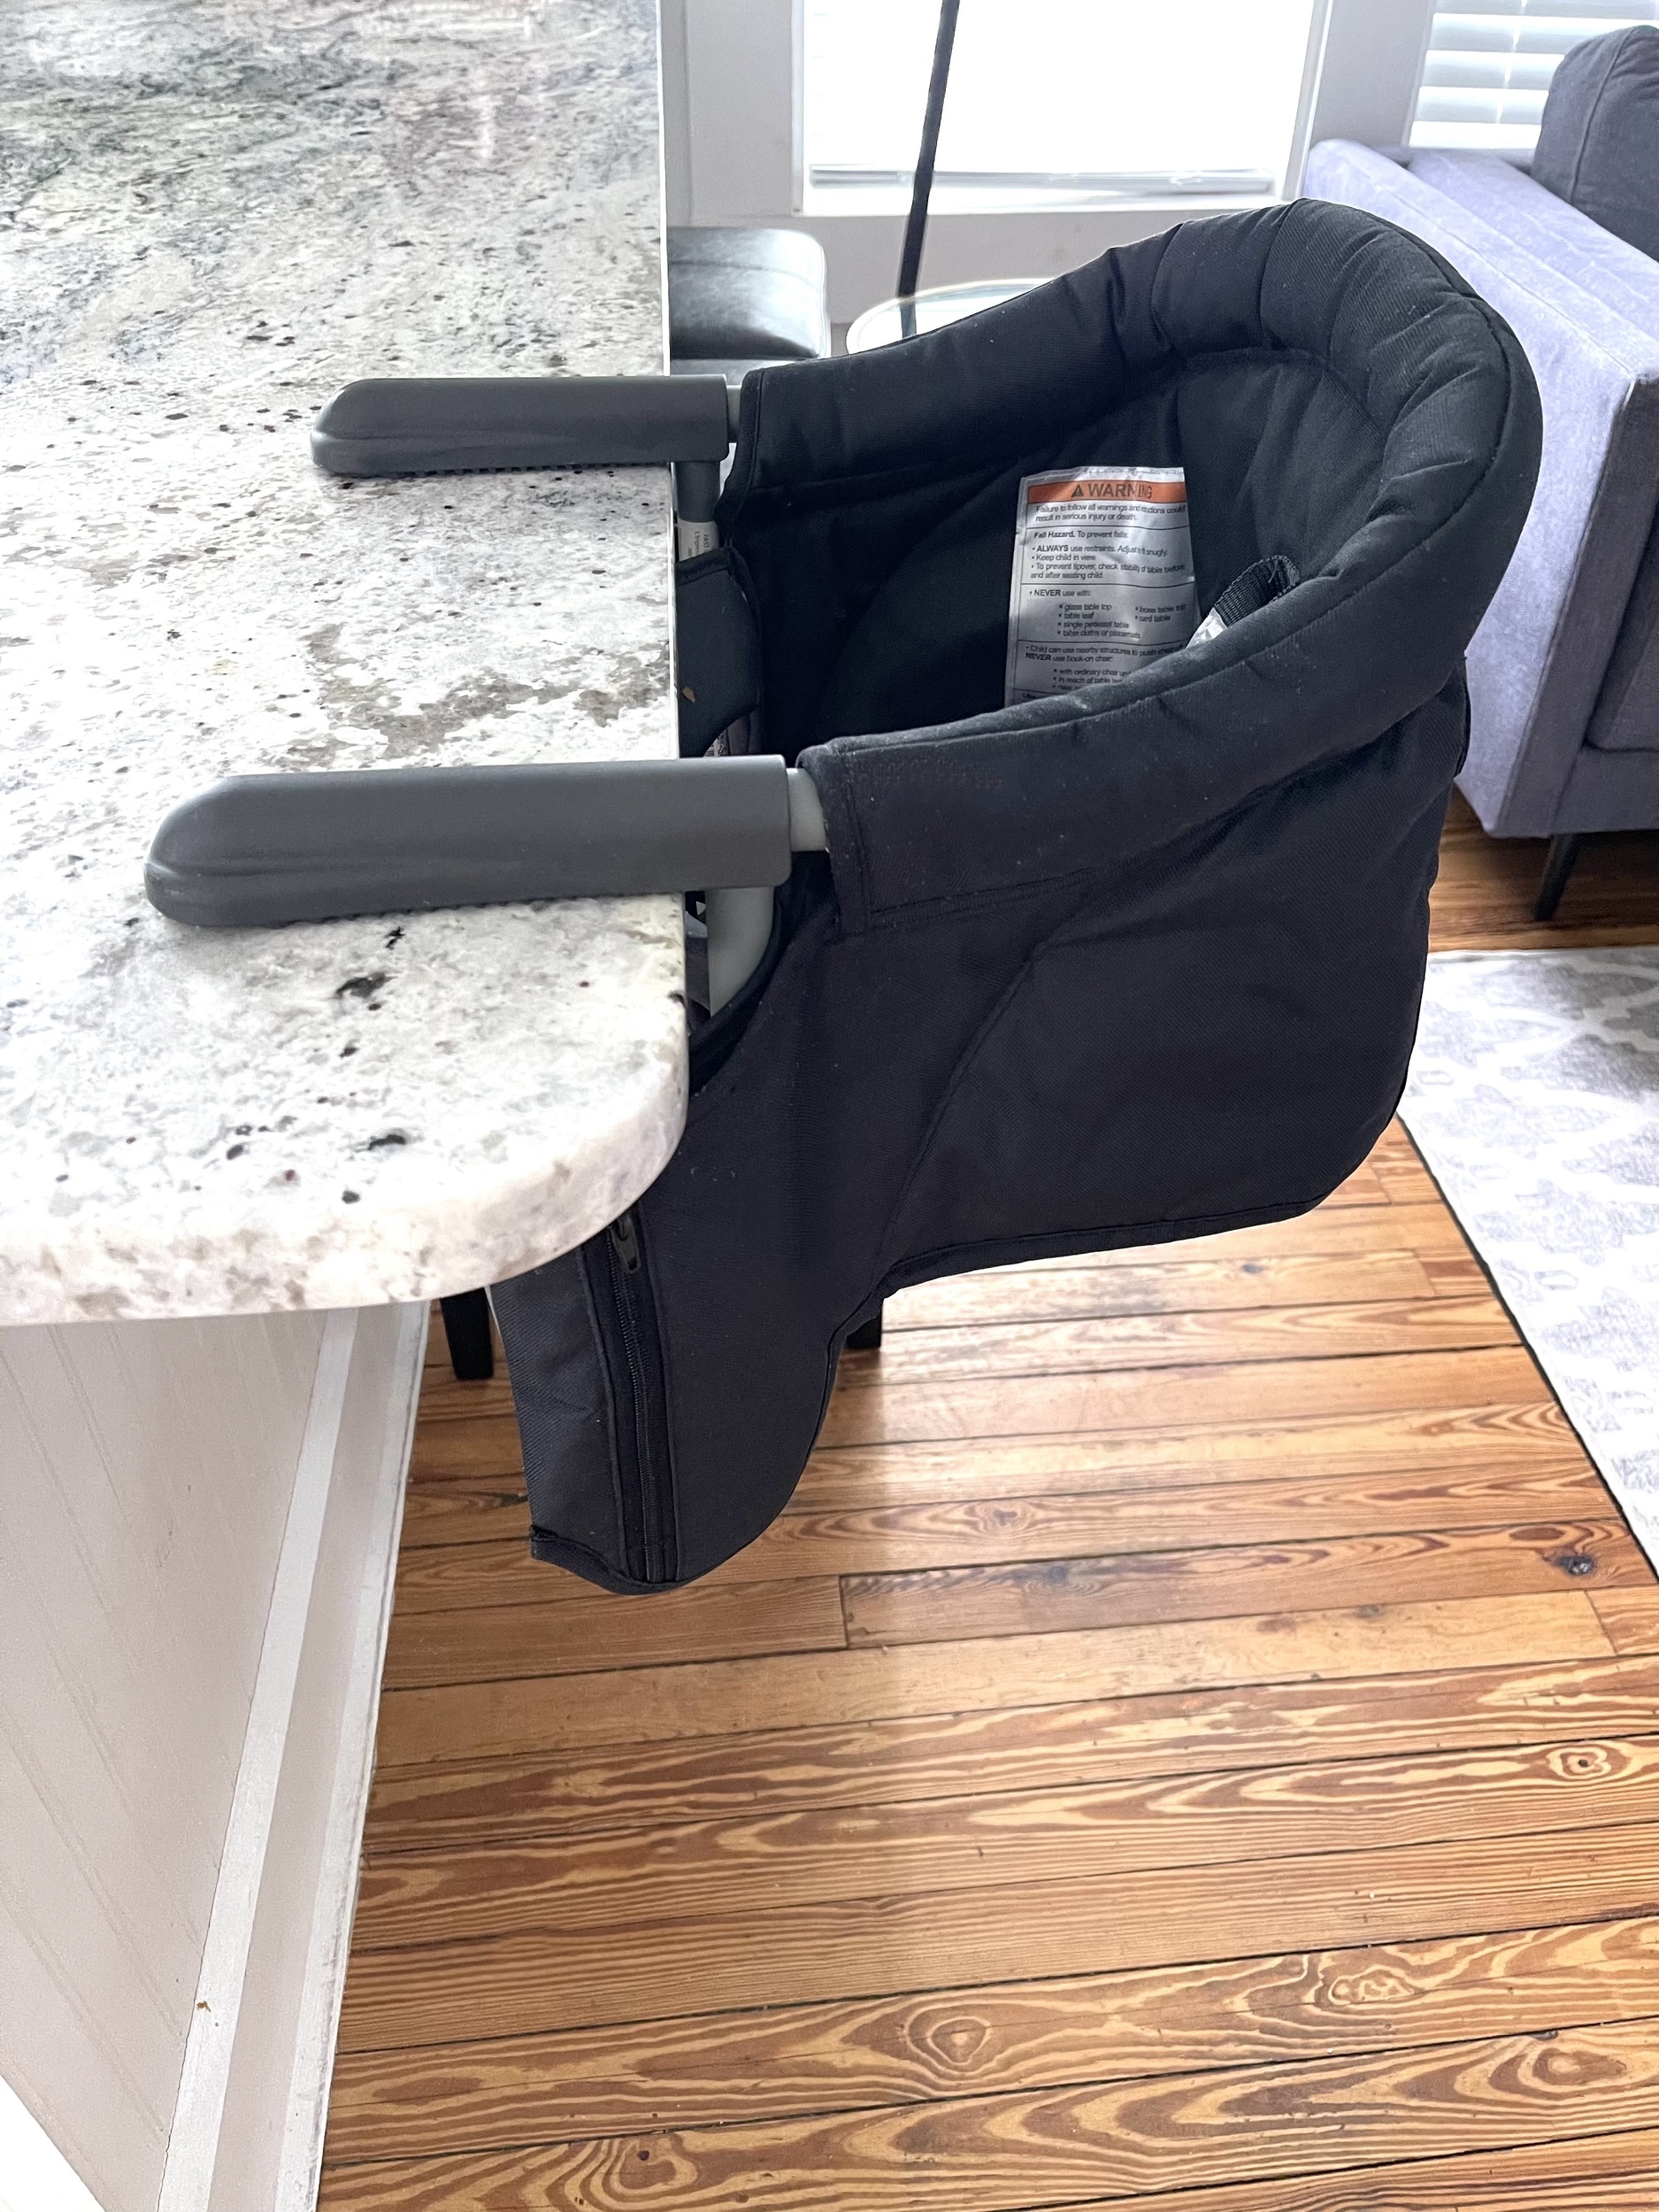 Portable Table Top High Chair from Amazon